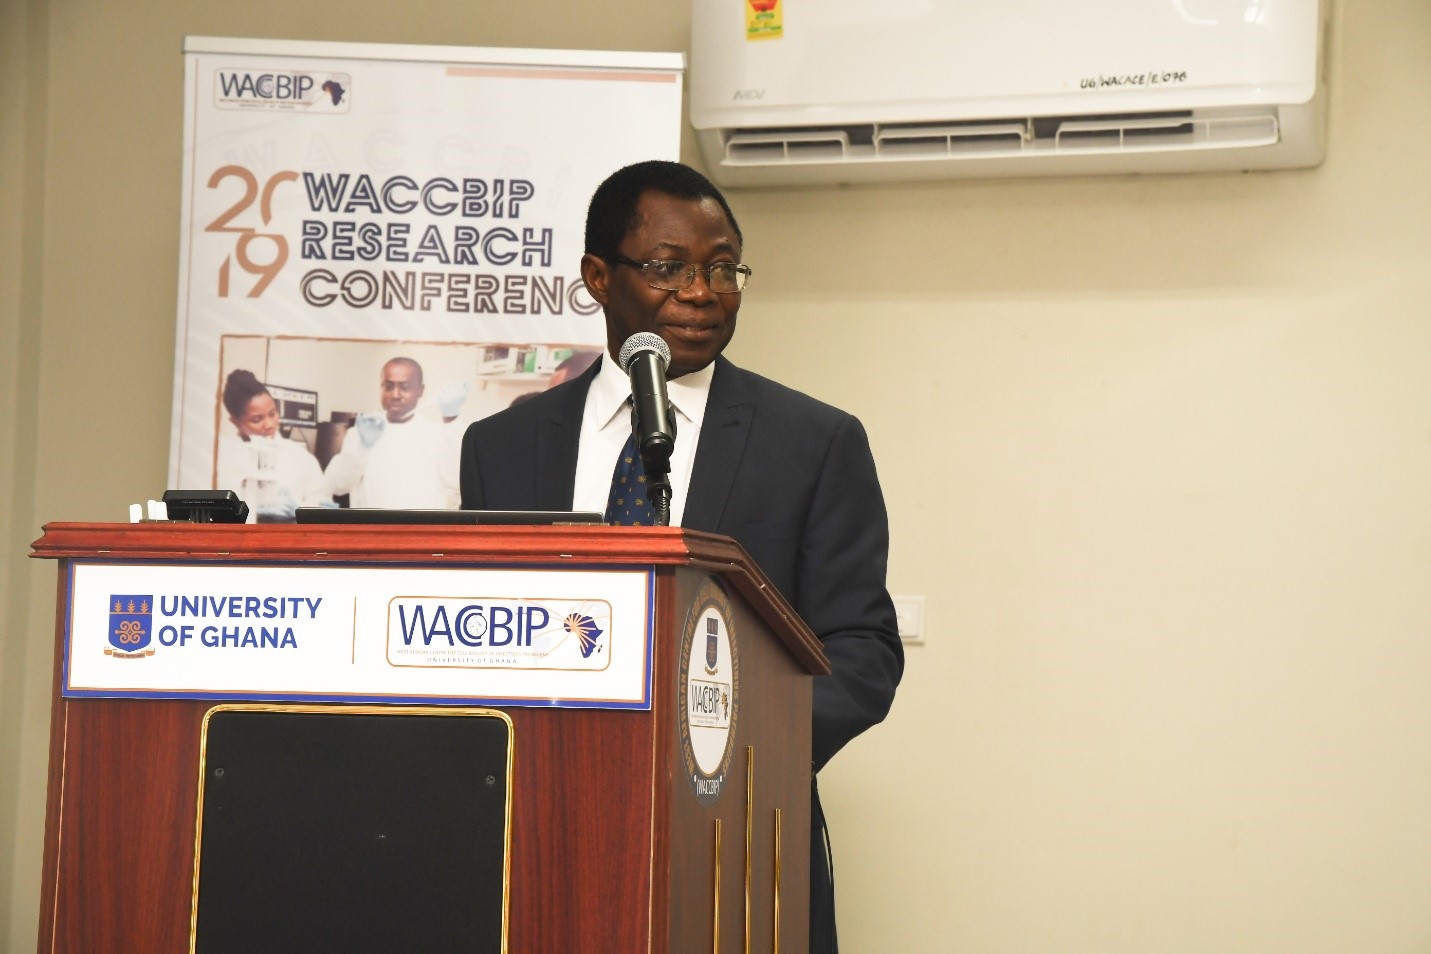 Prof. Samuel Kwame Offei, Pro-Vice Chancellor, Academics & Students Affairs, University of Ghana gives his remarks.